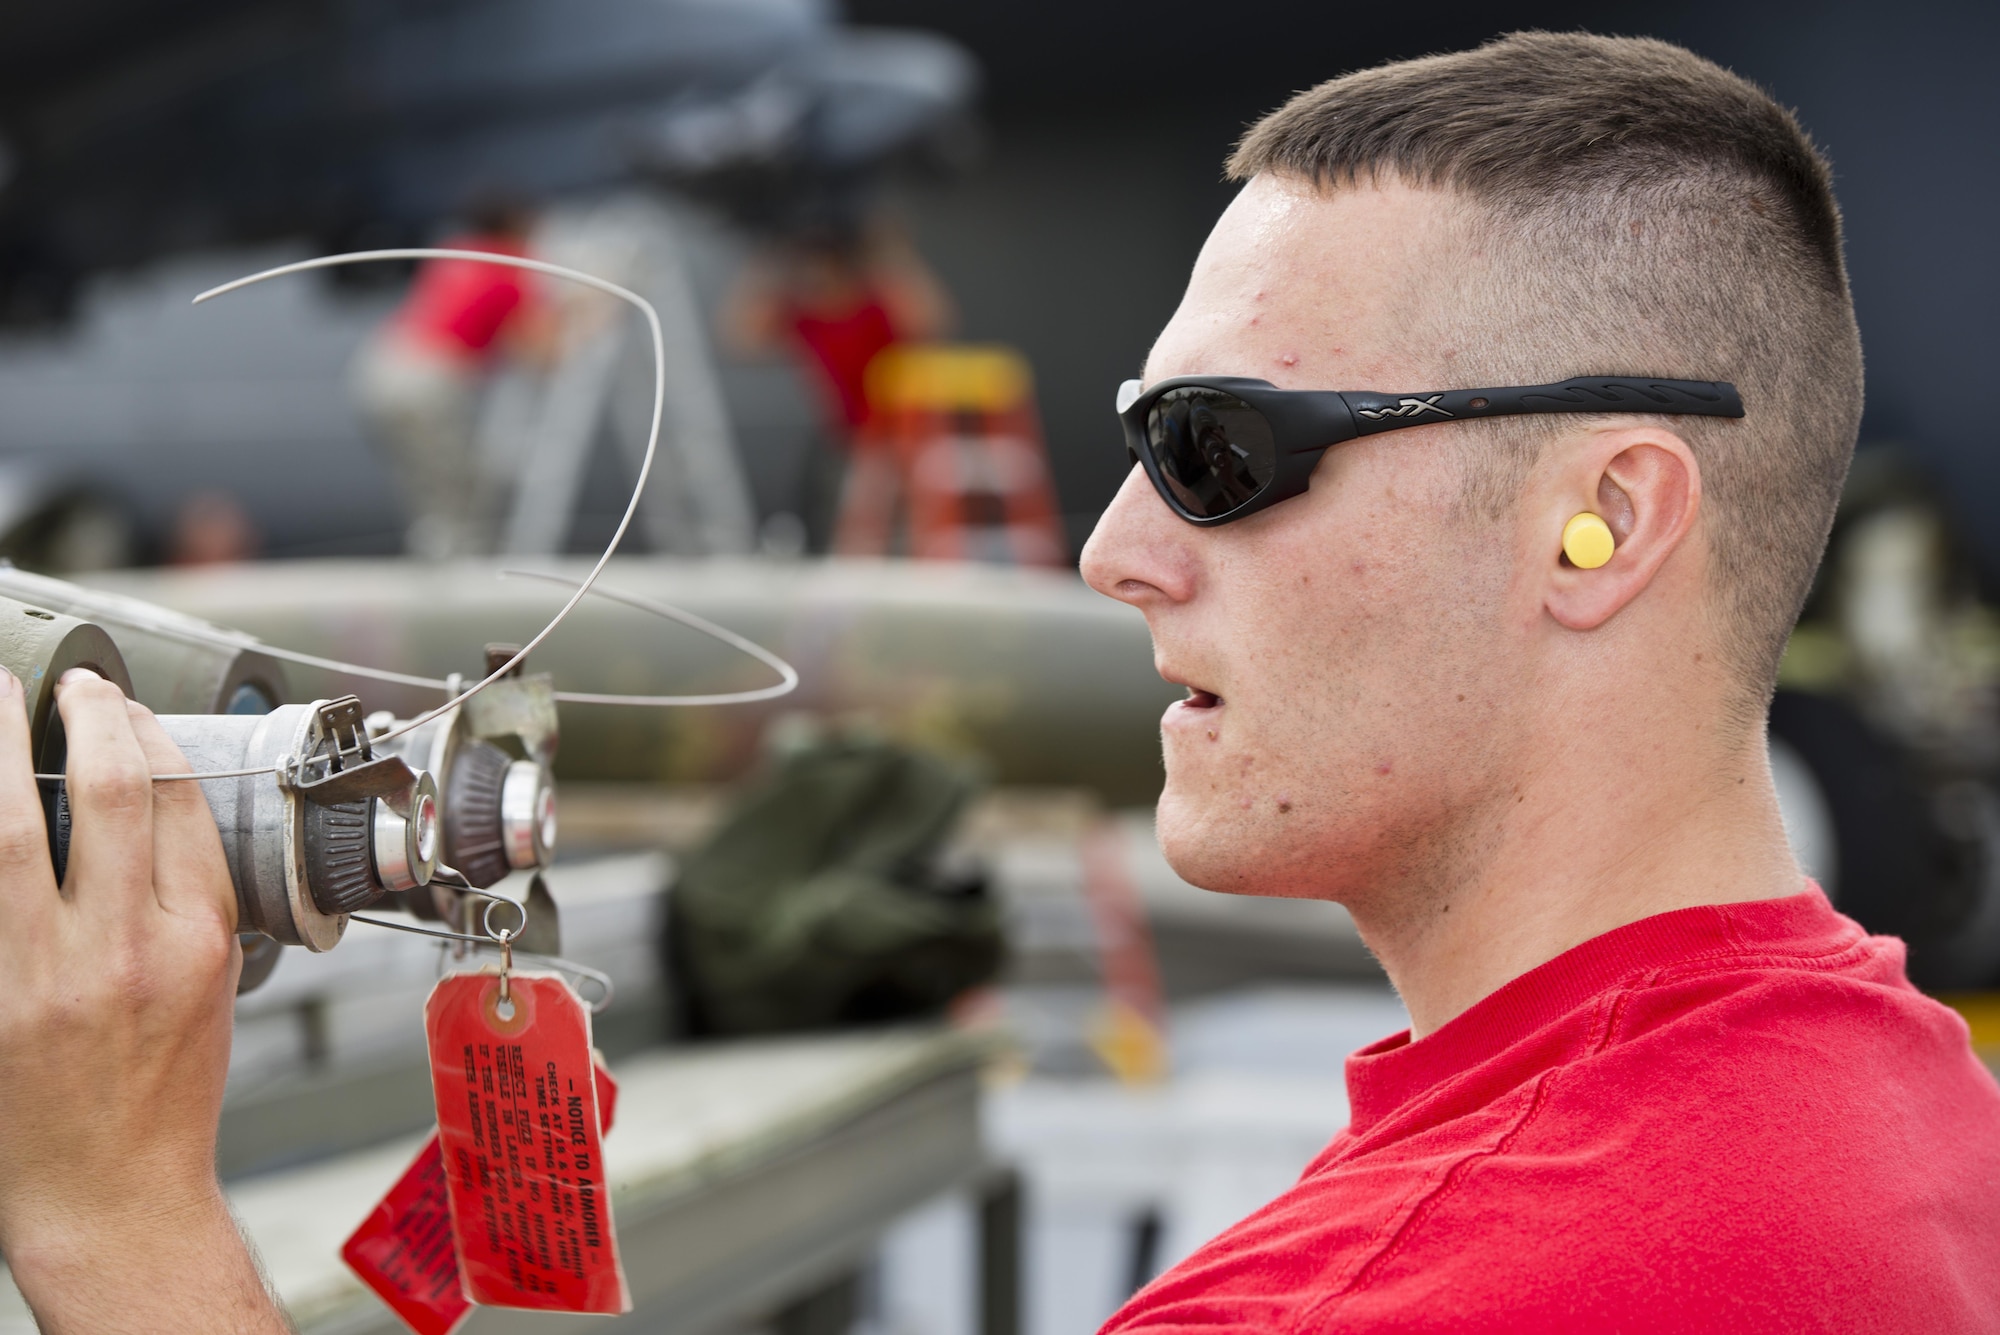 An Airmen from the 23rd Aircraft Maintenance Unit inspects an inert munition during the Load Crew of the Quarter competition at Dock 7 at Minot Air Force Base, N.D., July 22, 2016. Two weapons load crews, representing the 23rdand 69th Bomb Squadrons, were timed on their ability to load three inert munitions onto a B-52H Stratofortress. (U.S. Air Force photo/Airman 1st Class J.T. Armstrong)